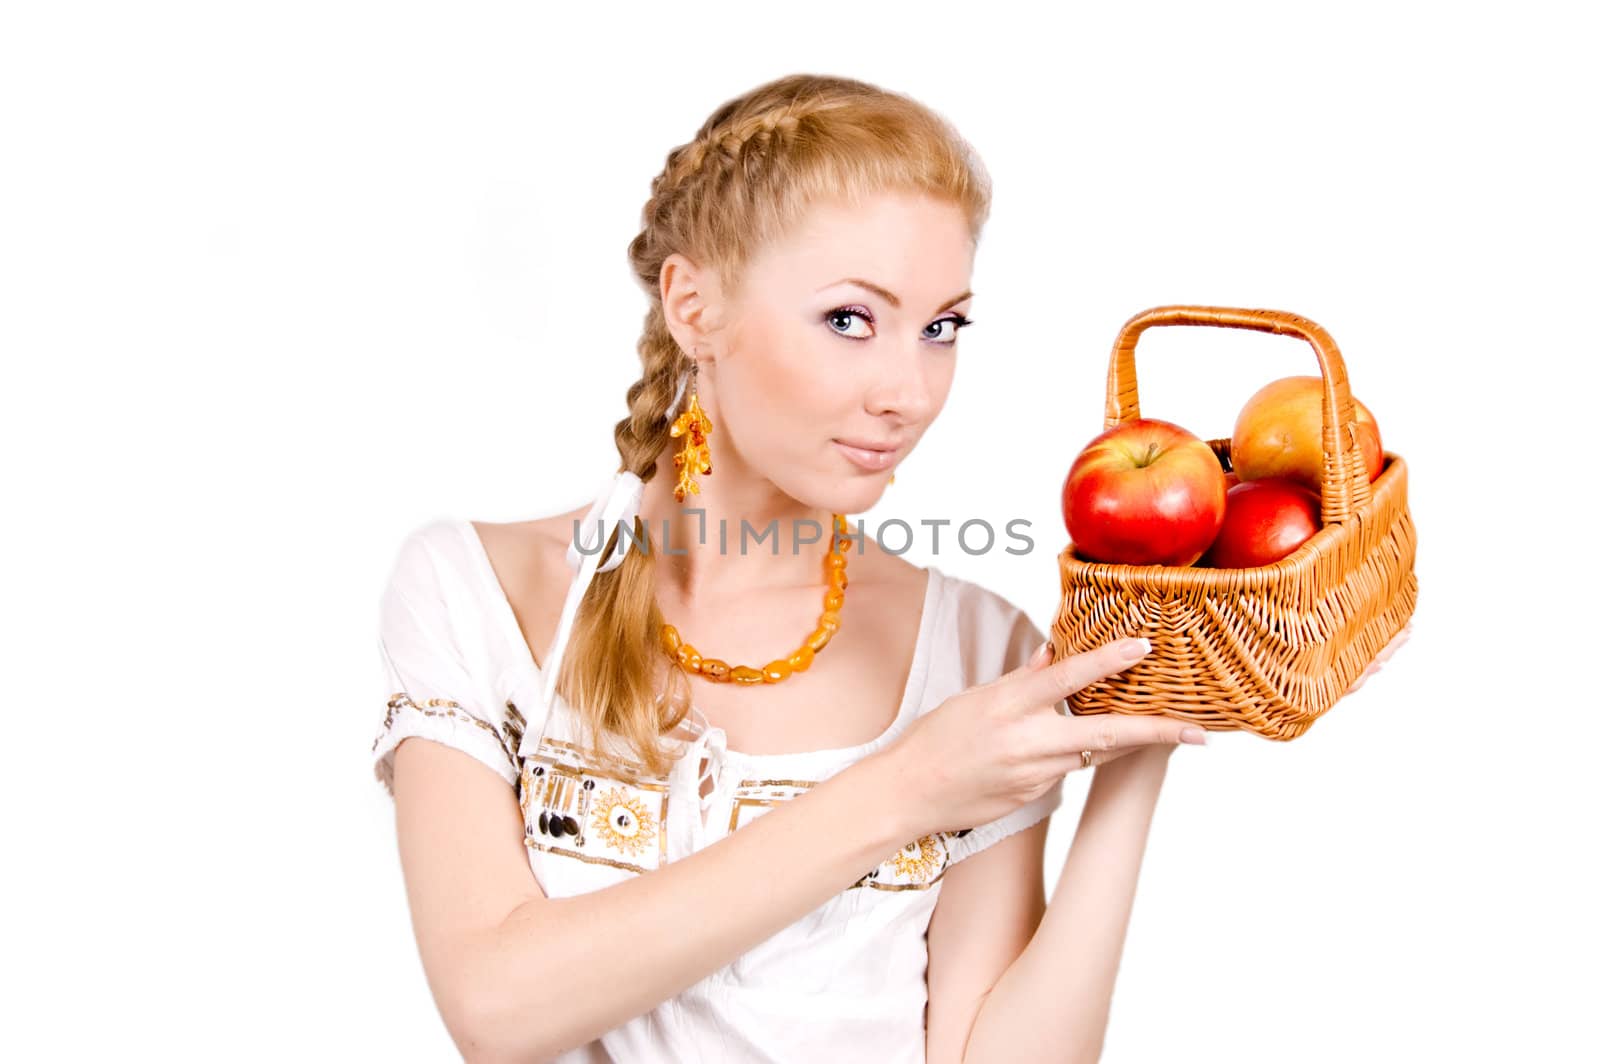 Redheaded woman holding basket of apples on white